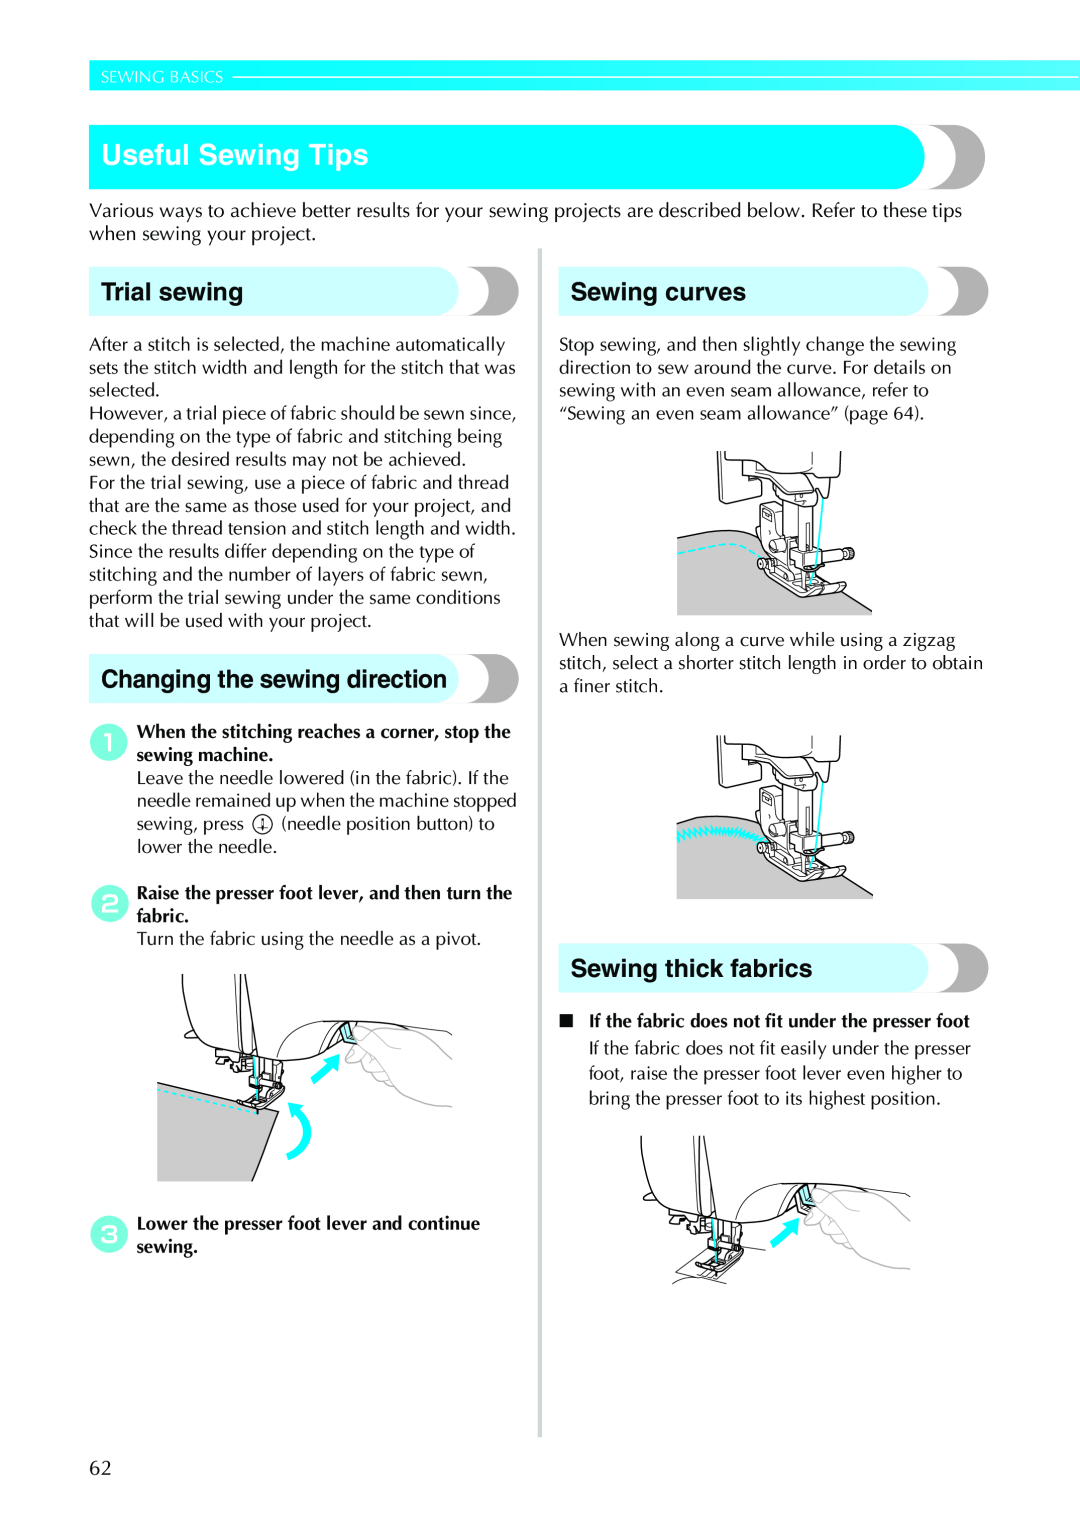 Brother Sewing Machines Useful Sewing Tips, Trial sewing, Changing the sewing direction, Sewing curves, Sewing Basics 